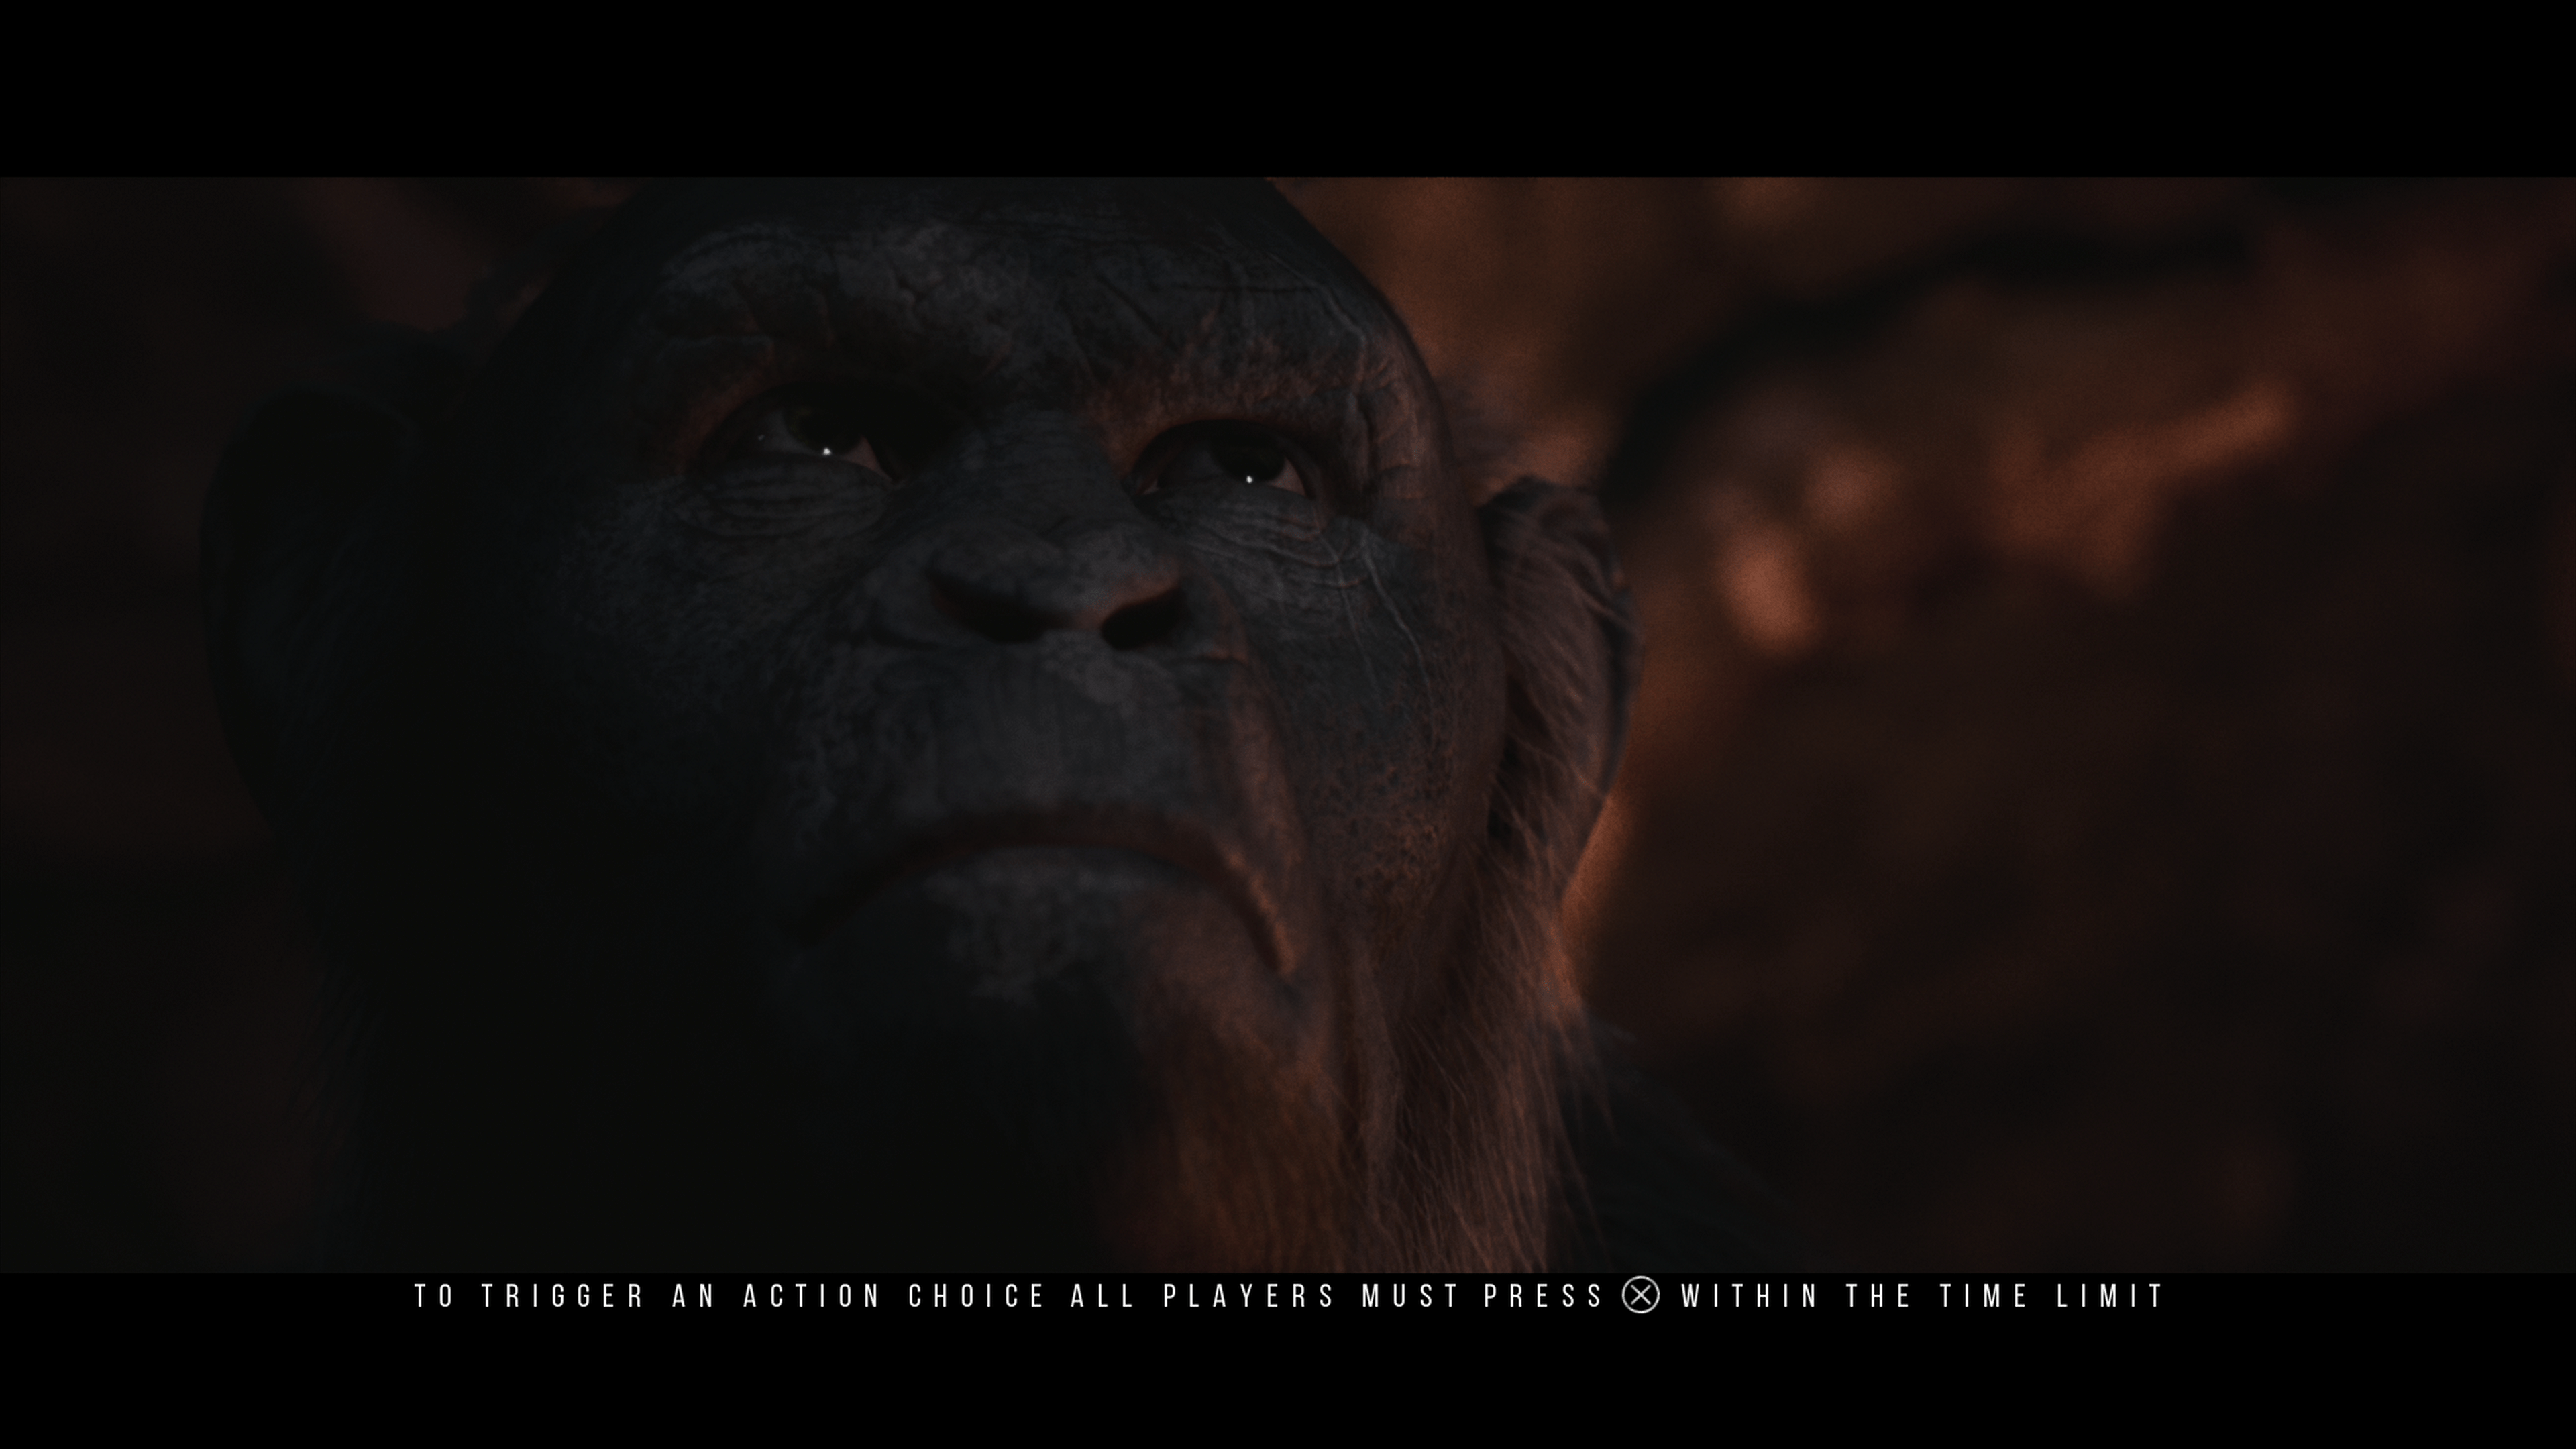 Planet Of The Apes: Last Frontier Has Great Apes, But That’s About It